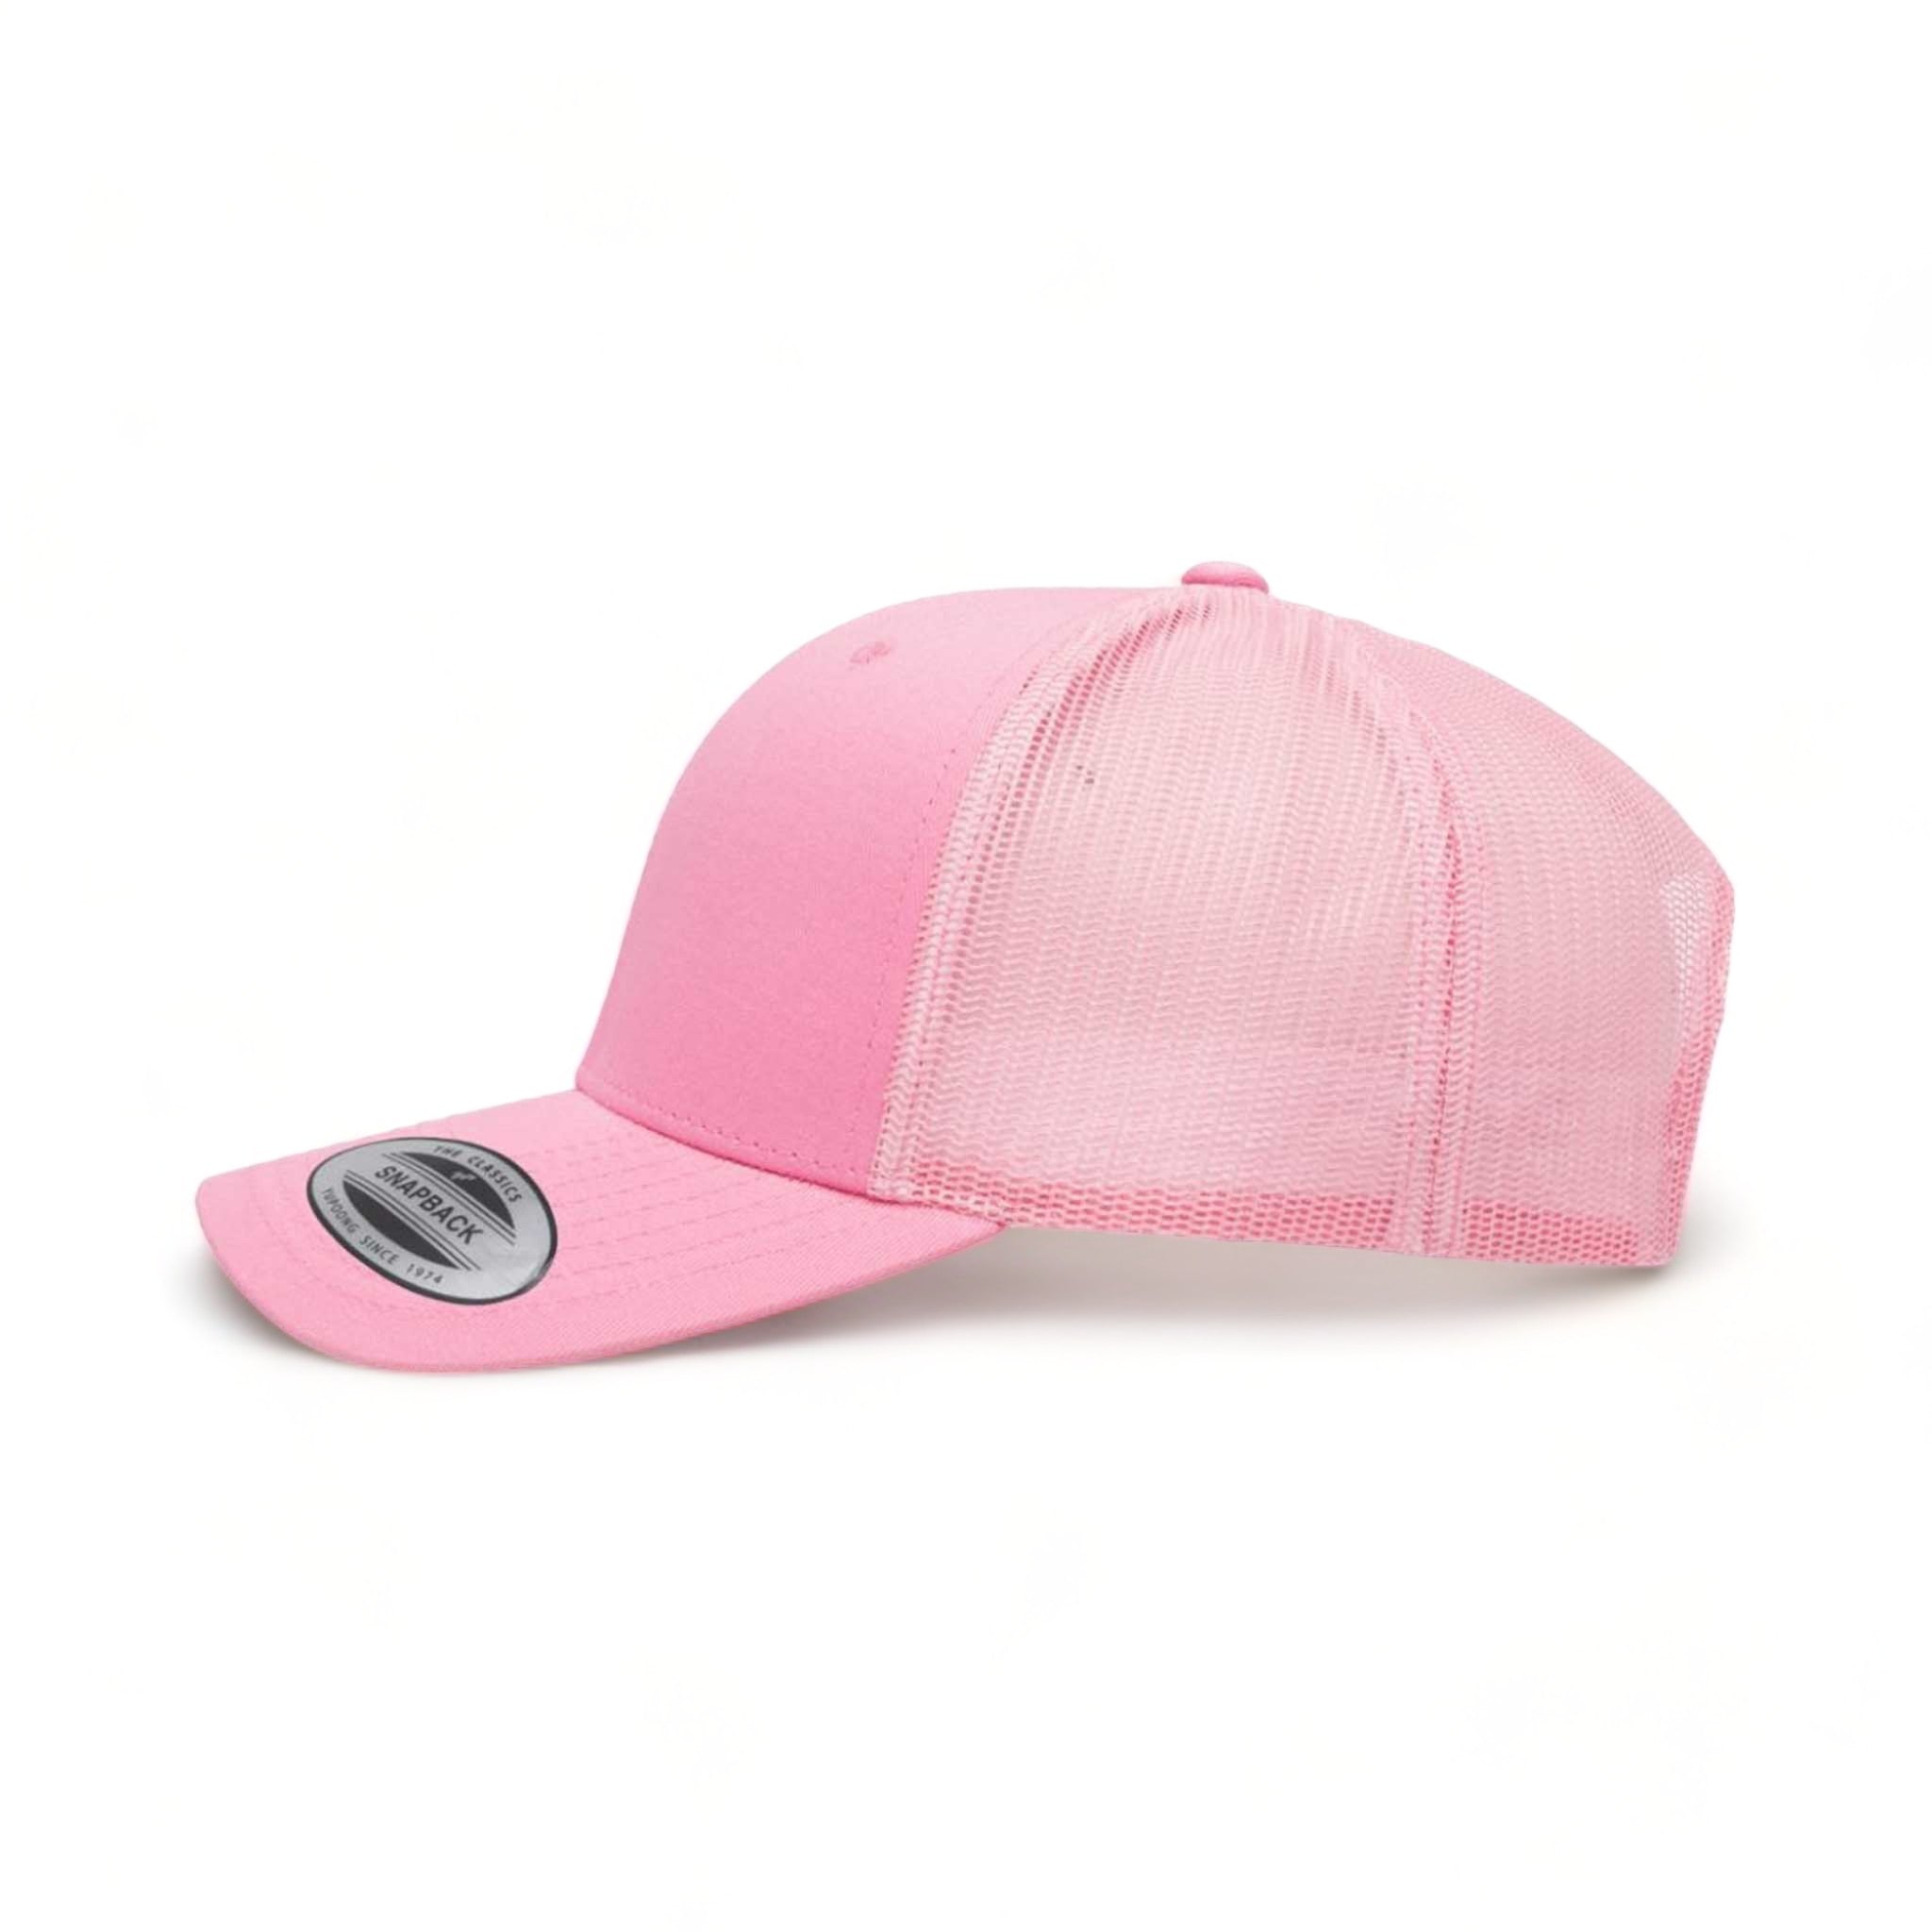 Side view of YP Classics 6606 custom hat in pink